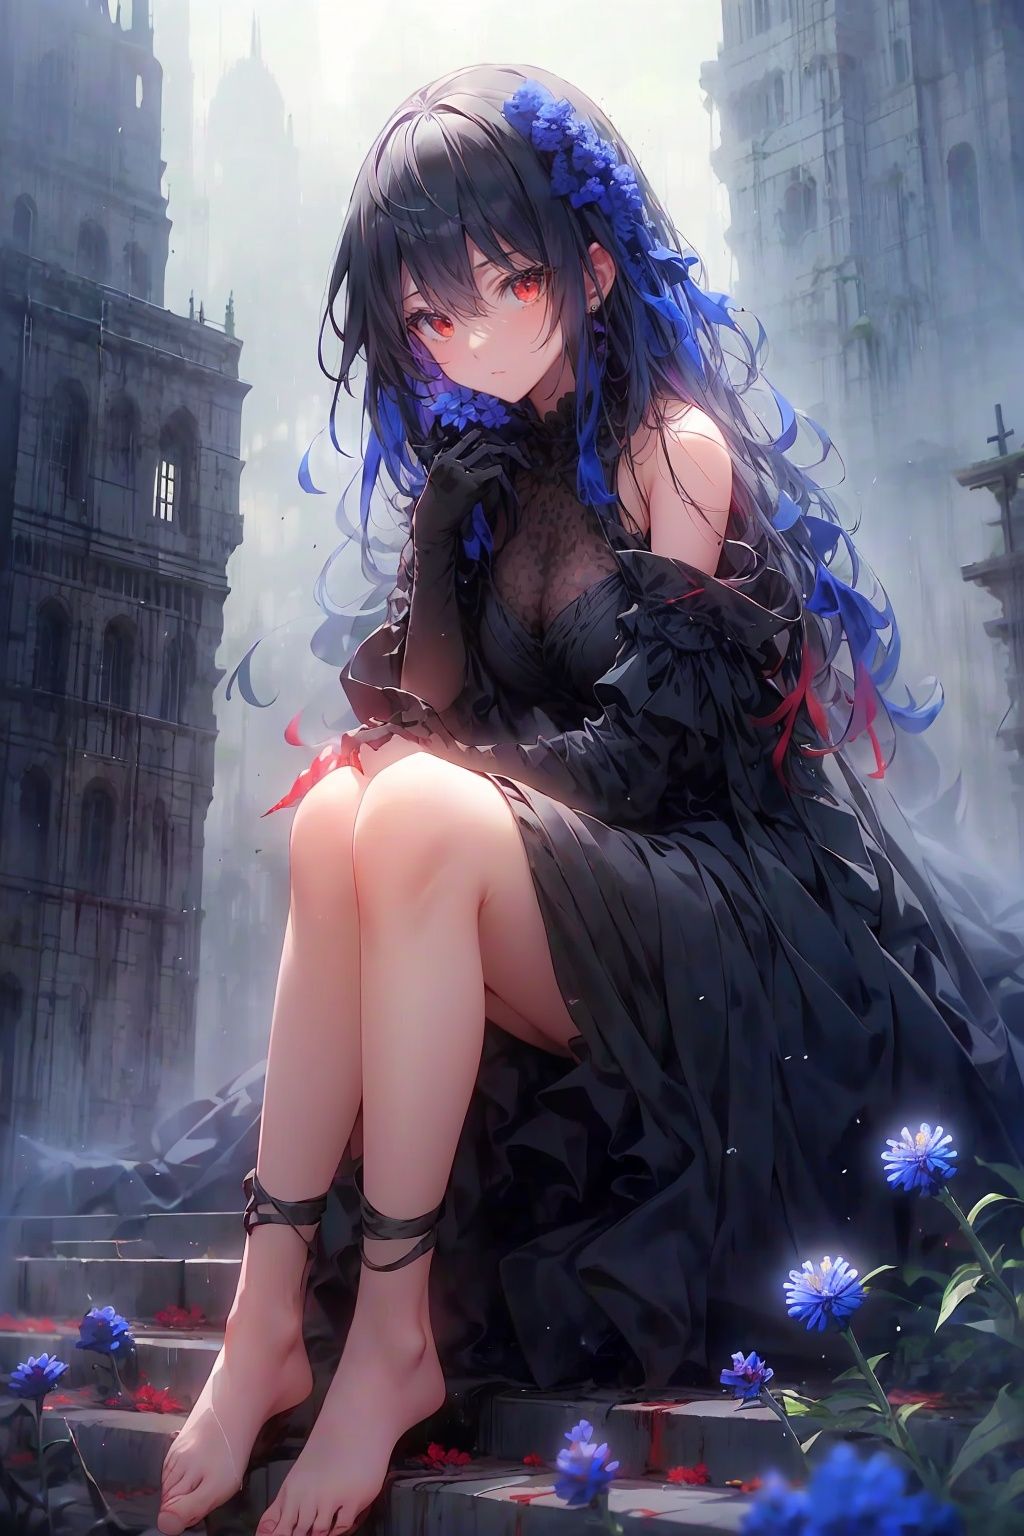  ((1girl,solo, alone, delicate face, cute, red eye pupil, pink eyelashes, red eye shadow, pink lips,excellent face,expression is enchanting,)), Character close-up,
leaning against the ruins, with a floating skeleton in the background,her posture is seductive, and there is a flicker of evil energy runes in the background, blood mist filled, and soft light. No shoes,My feet are covered in bones. Skeletons, many skeletons. Official art, unit 8 k wallpaper, ultra detailed, beautiful and aesthetic, masterpiece, best quality, extremely detailed, dynamic angle, paper skin, radius, iuminosity, cowboyshot, the most beautiful form of Chaos, elegant, a brutalist designed, visual colors, romanticism, by James Jean, roby dwi antono, cross tran, francis bacon, Michael mraz, Adrian ghenie, Petra cortright, Gerhard richter, Takato yamamoto, ashley wood, atmospheric, ((late at night,dark)), light rain,dark, limited palette, contrast,(((Cornflower))), cornflower, cornflower,vines, forest, lens flare, hdr, Tyndall effect,damp,wet,cold theme, broken wall, aqua theme, floating hair, high detail, nayutaren, Nyarly,Sitting in the Flower Sea